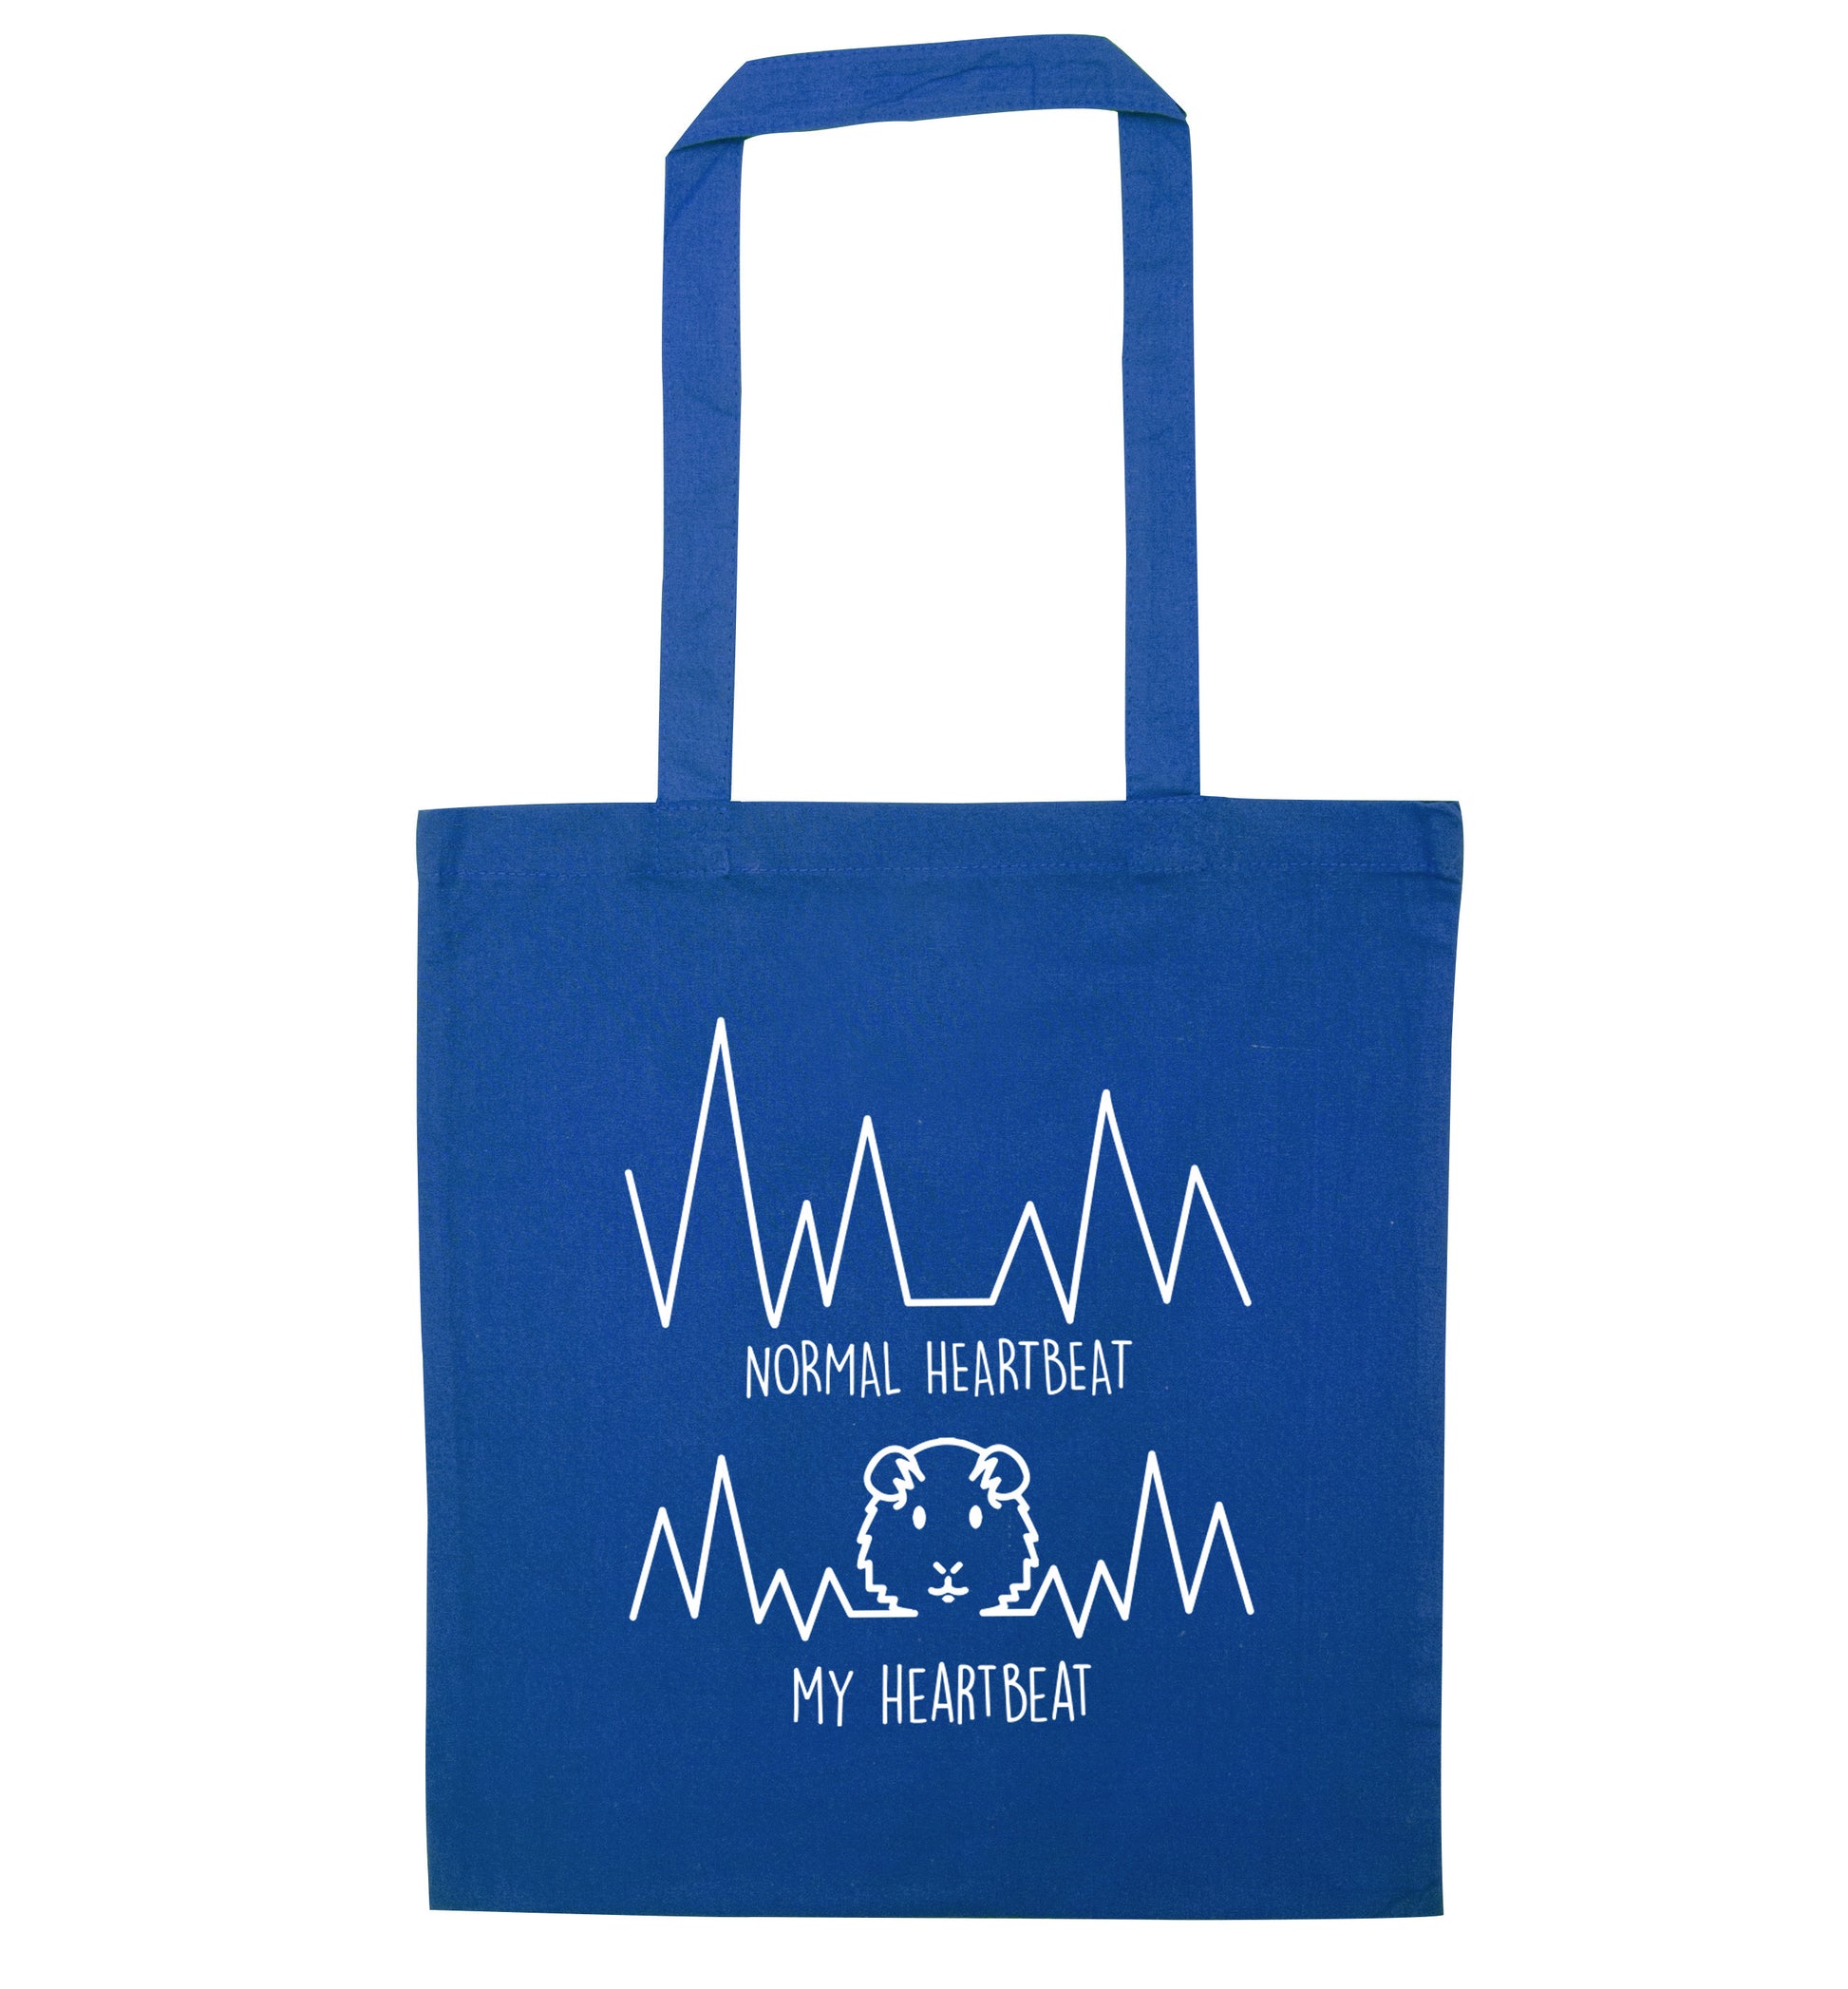 Normal heartbeat vs my heartbeat guinea pig lover blue tote bag